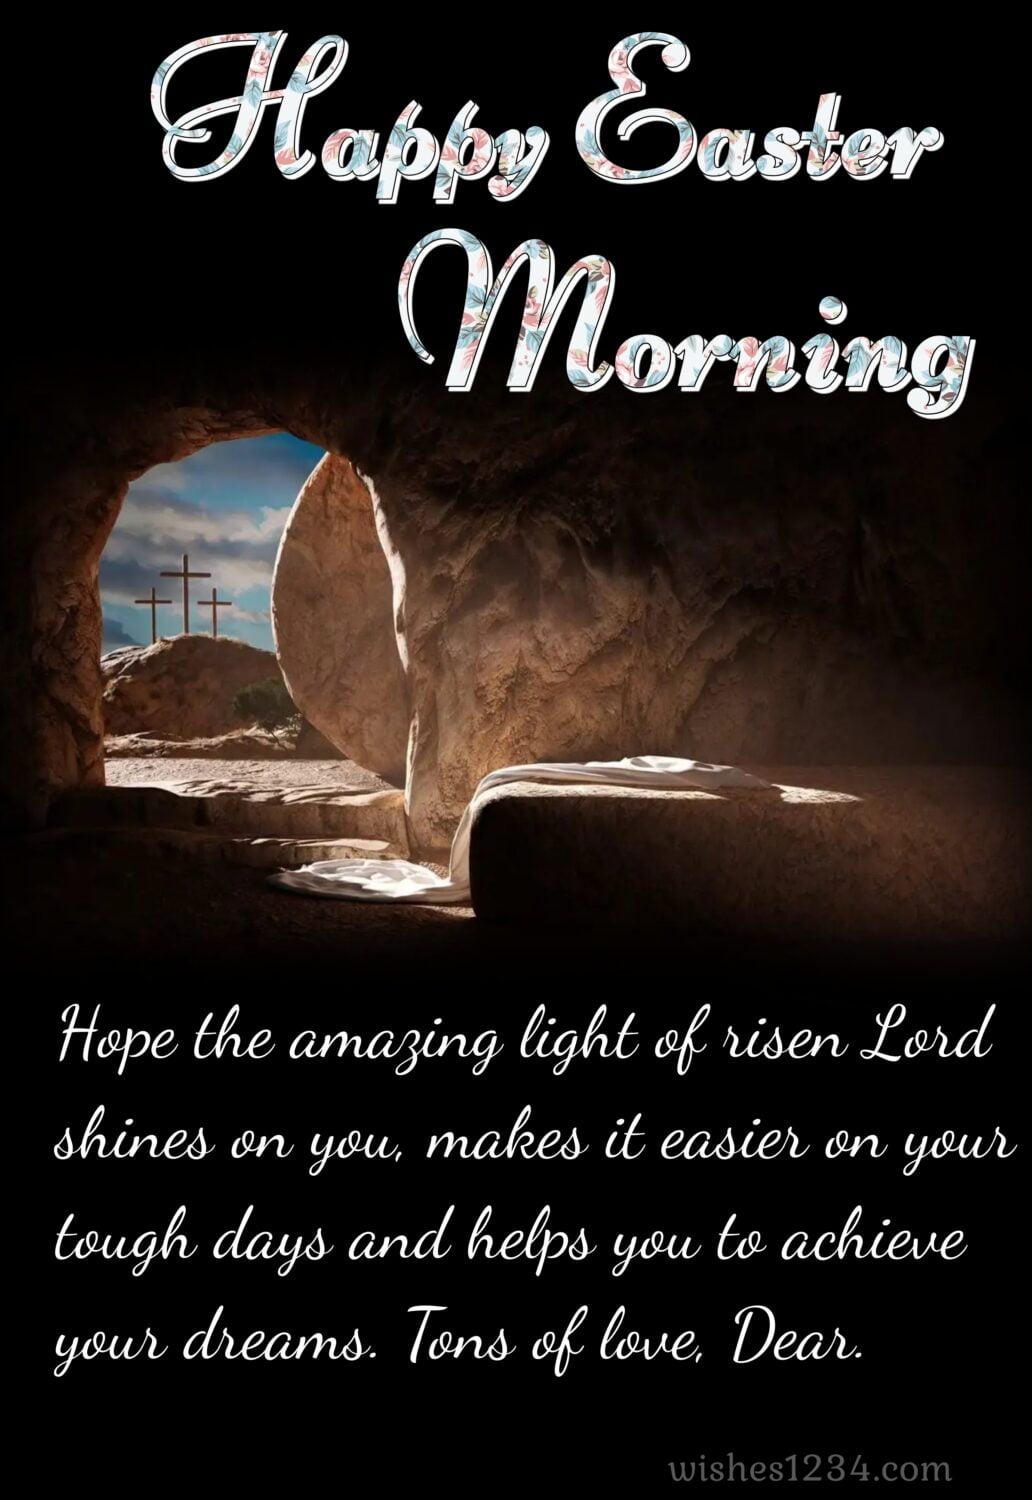 Cave with open door & light, Happy Easter Wishes, Quotes & Images.